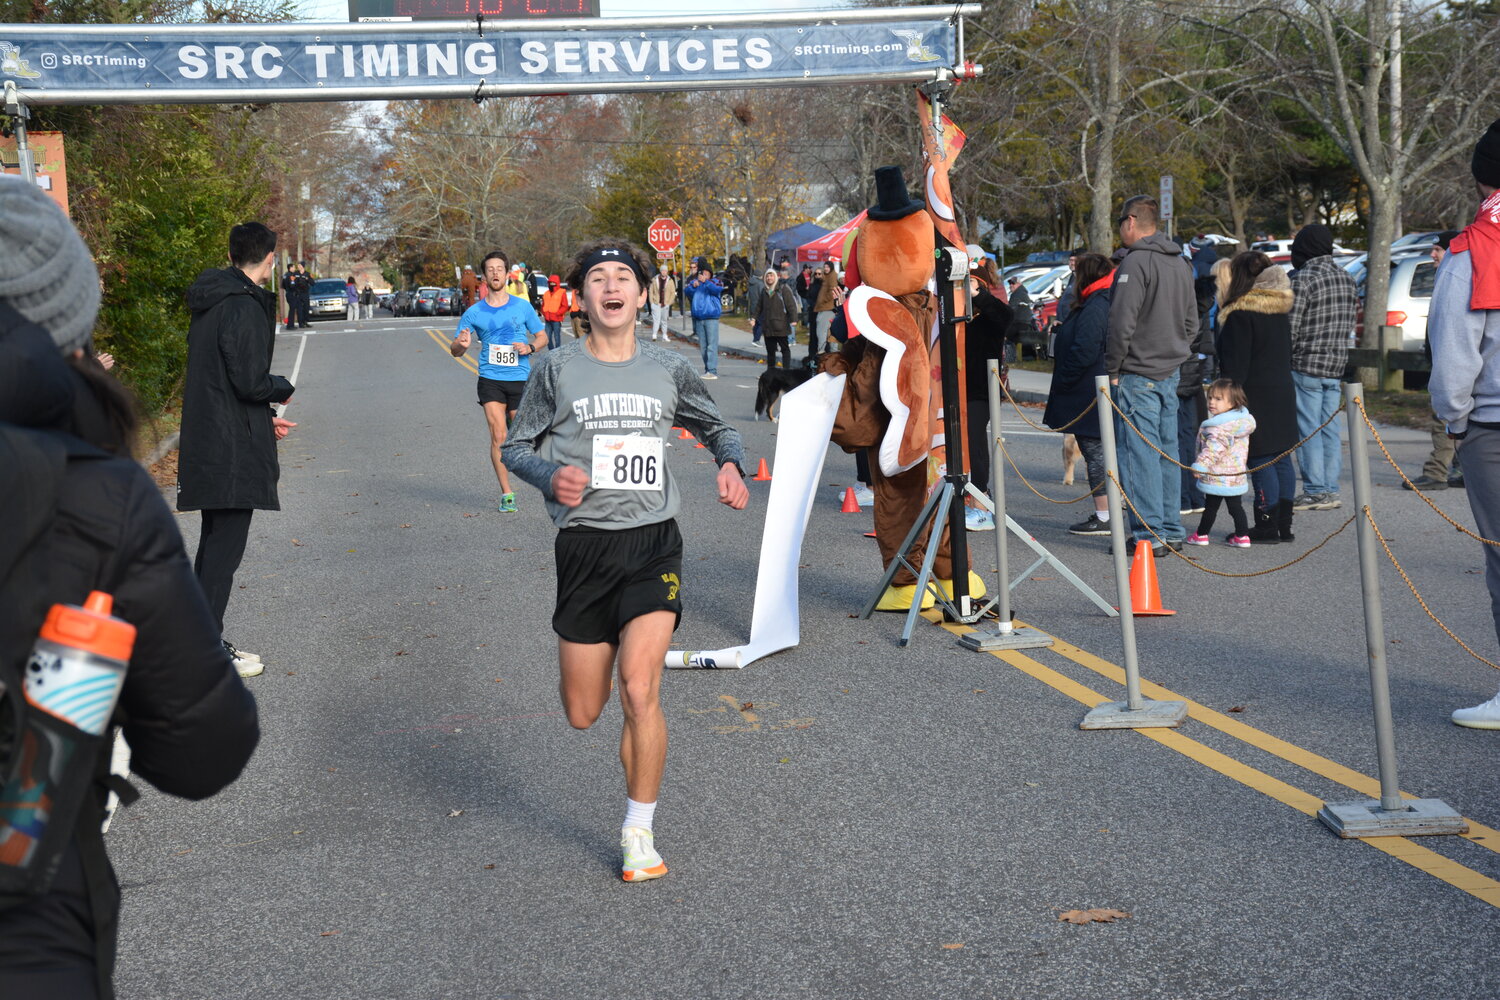 The winner of the Turkey Trot was Liam Curley, 16, of Islip.